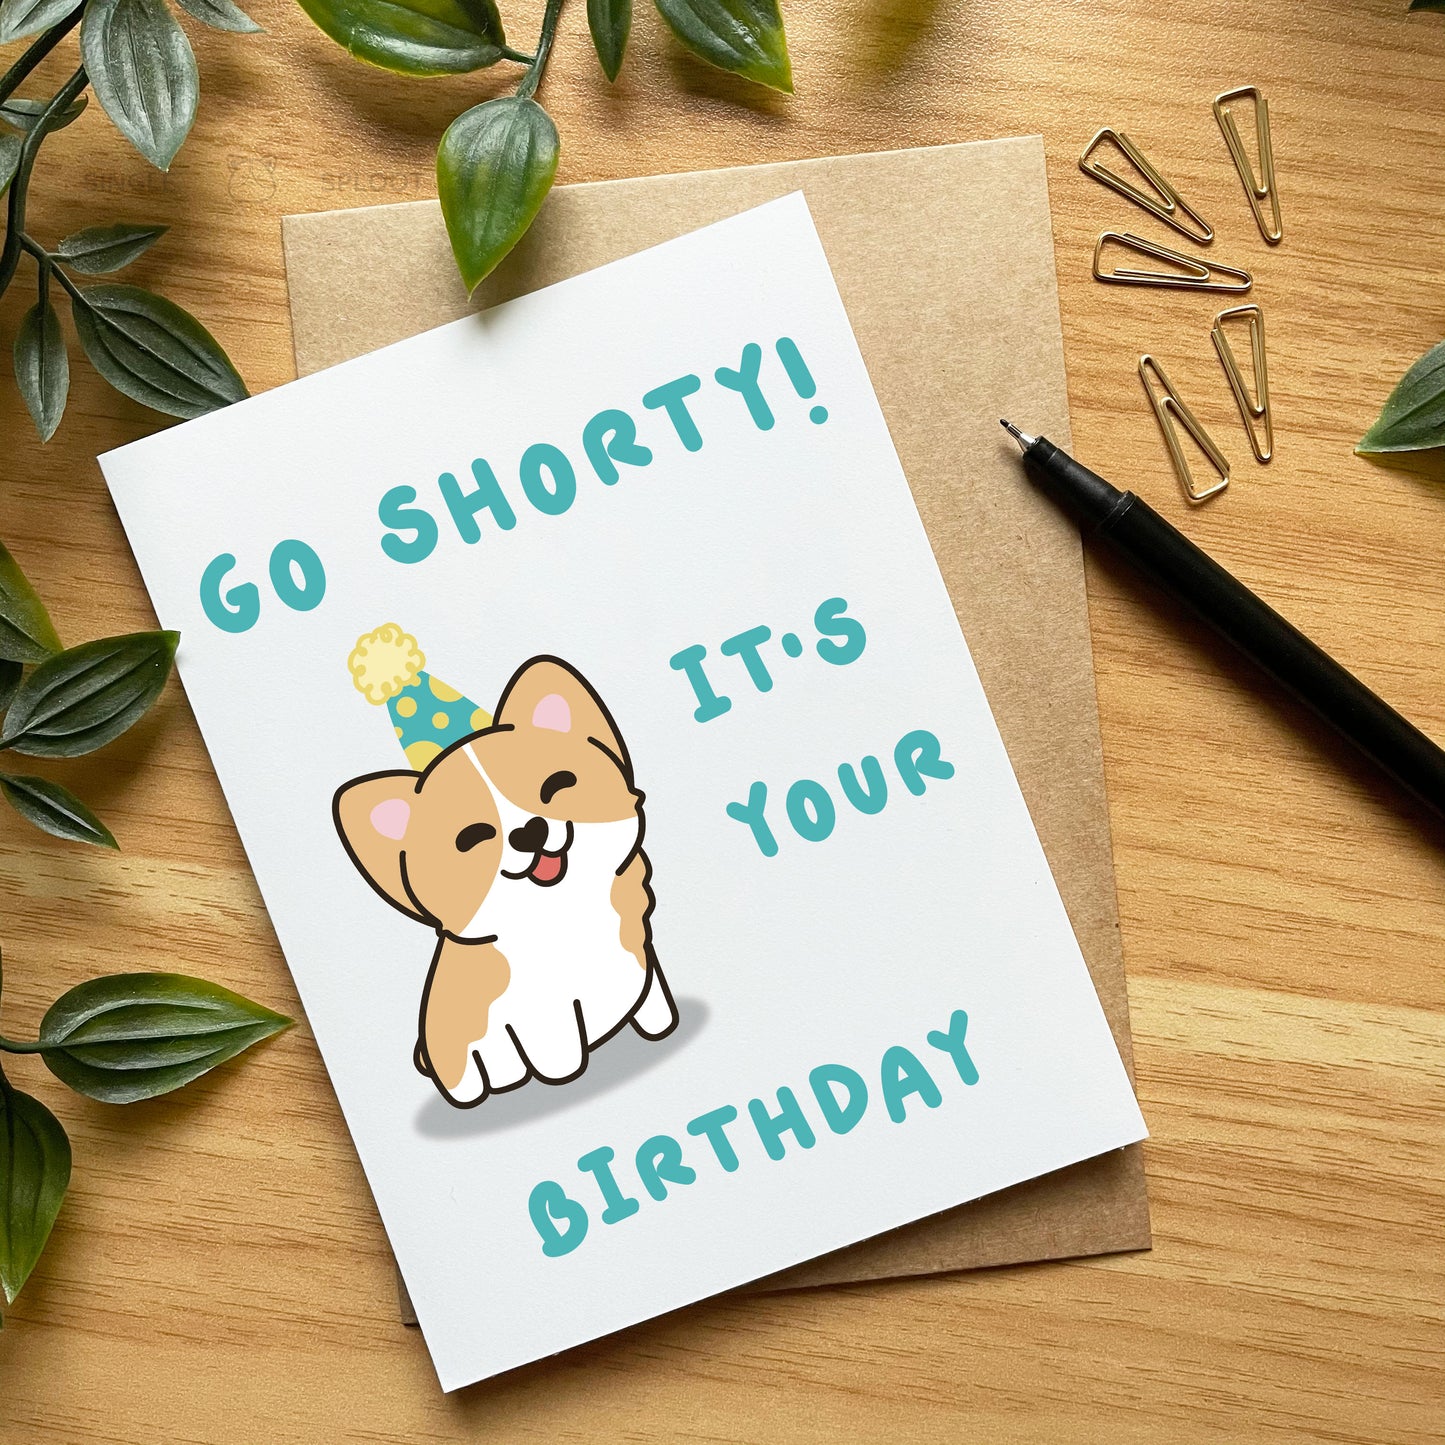 Go Shorty! It's Your Barkday!